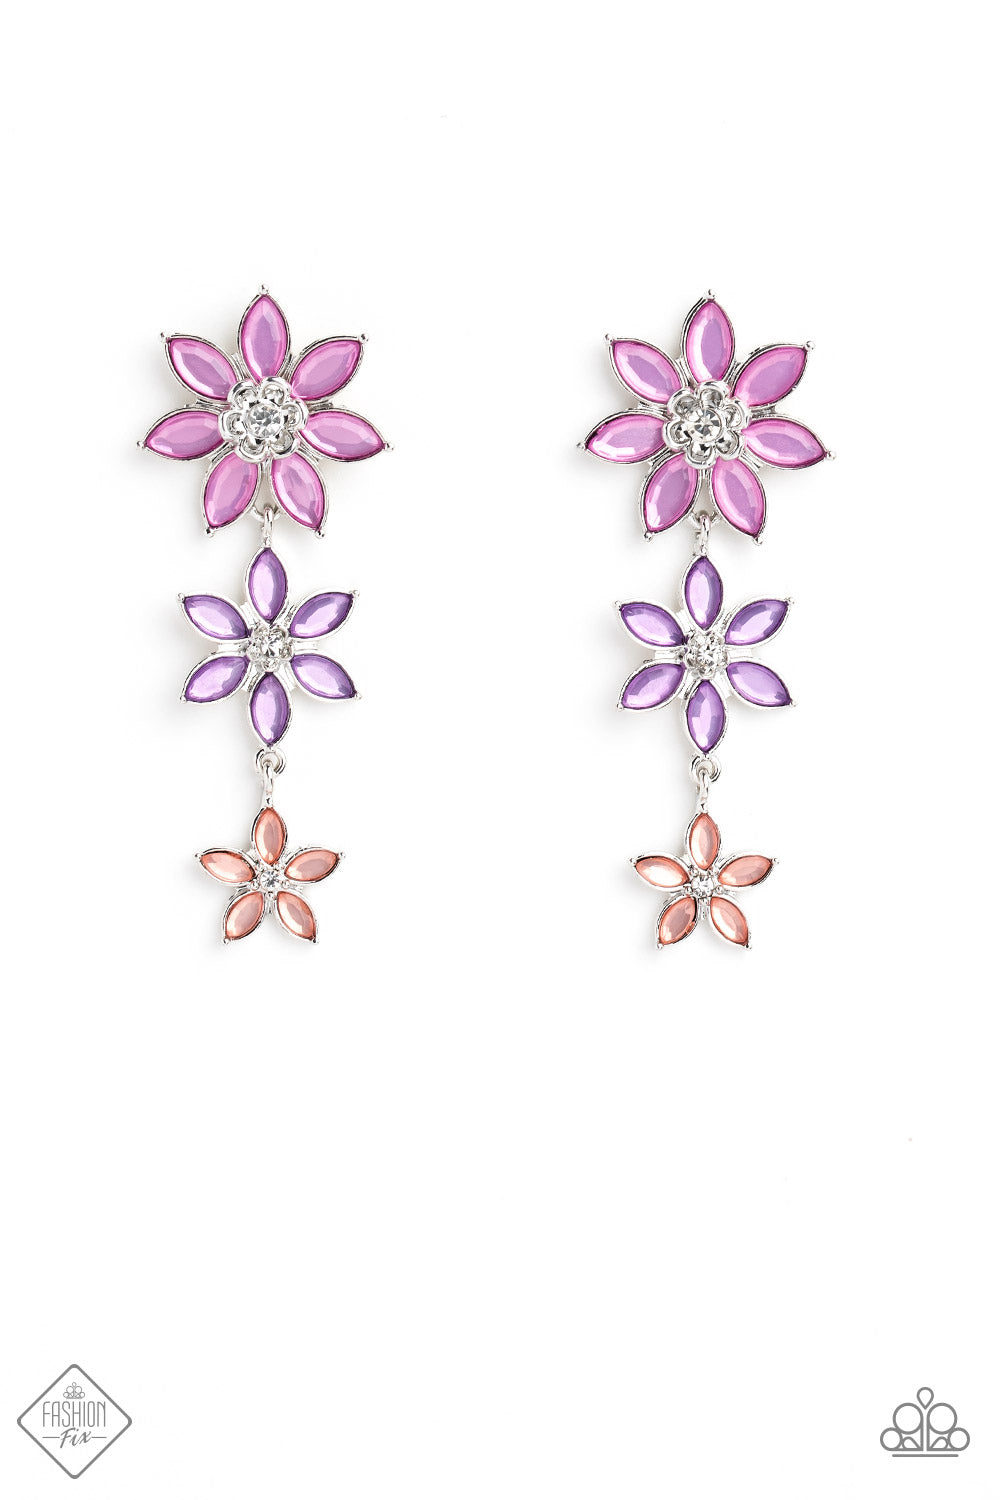 Lets Get it GARLAND - Multi Lavender Earrings - Paparazzi Accessories - Glassy marquise-cut petals in shades of orchid, lavender, and Peach Pink fan out around silver centers topped with sparkling white gems. The vibrant flowers gradually decrease in size as they fall from the ear, bringing whimsical movement to the colorful cascade.